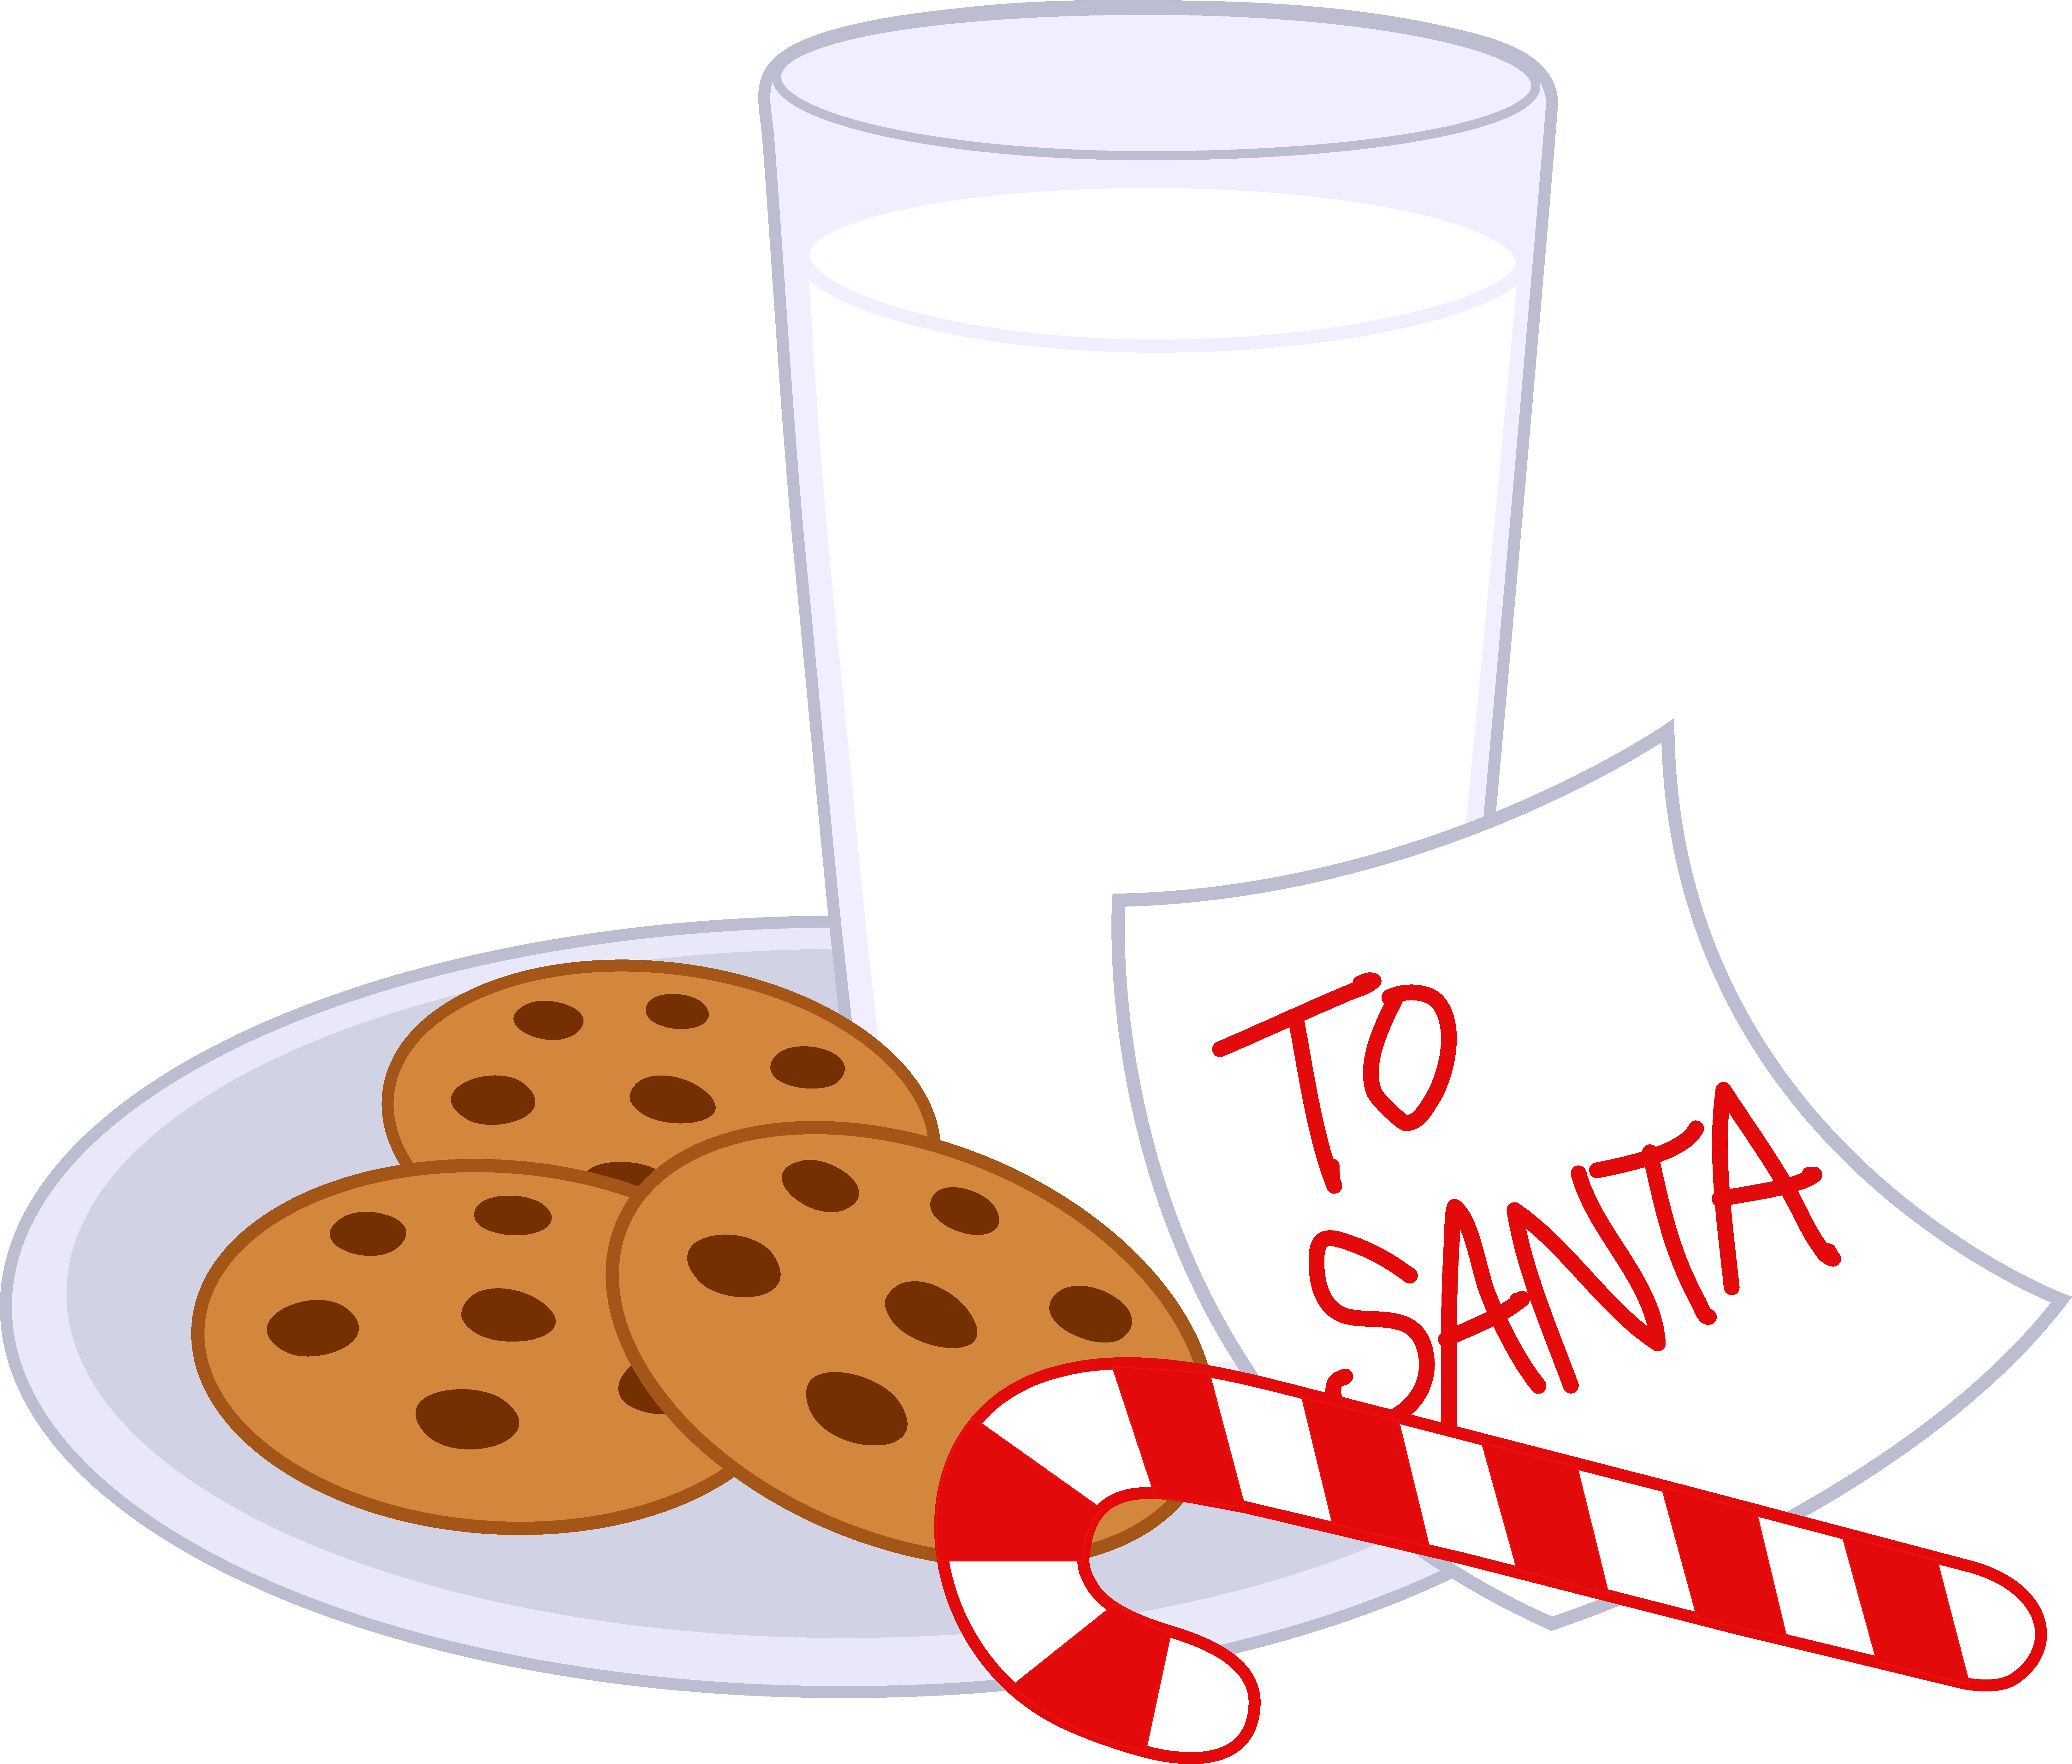 Cookies And Milk For Santa Claus - Cookies And Milk Christmas (6566x5591)